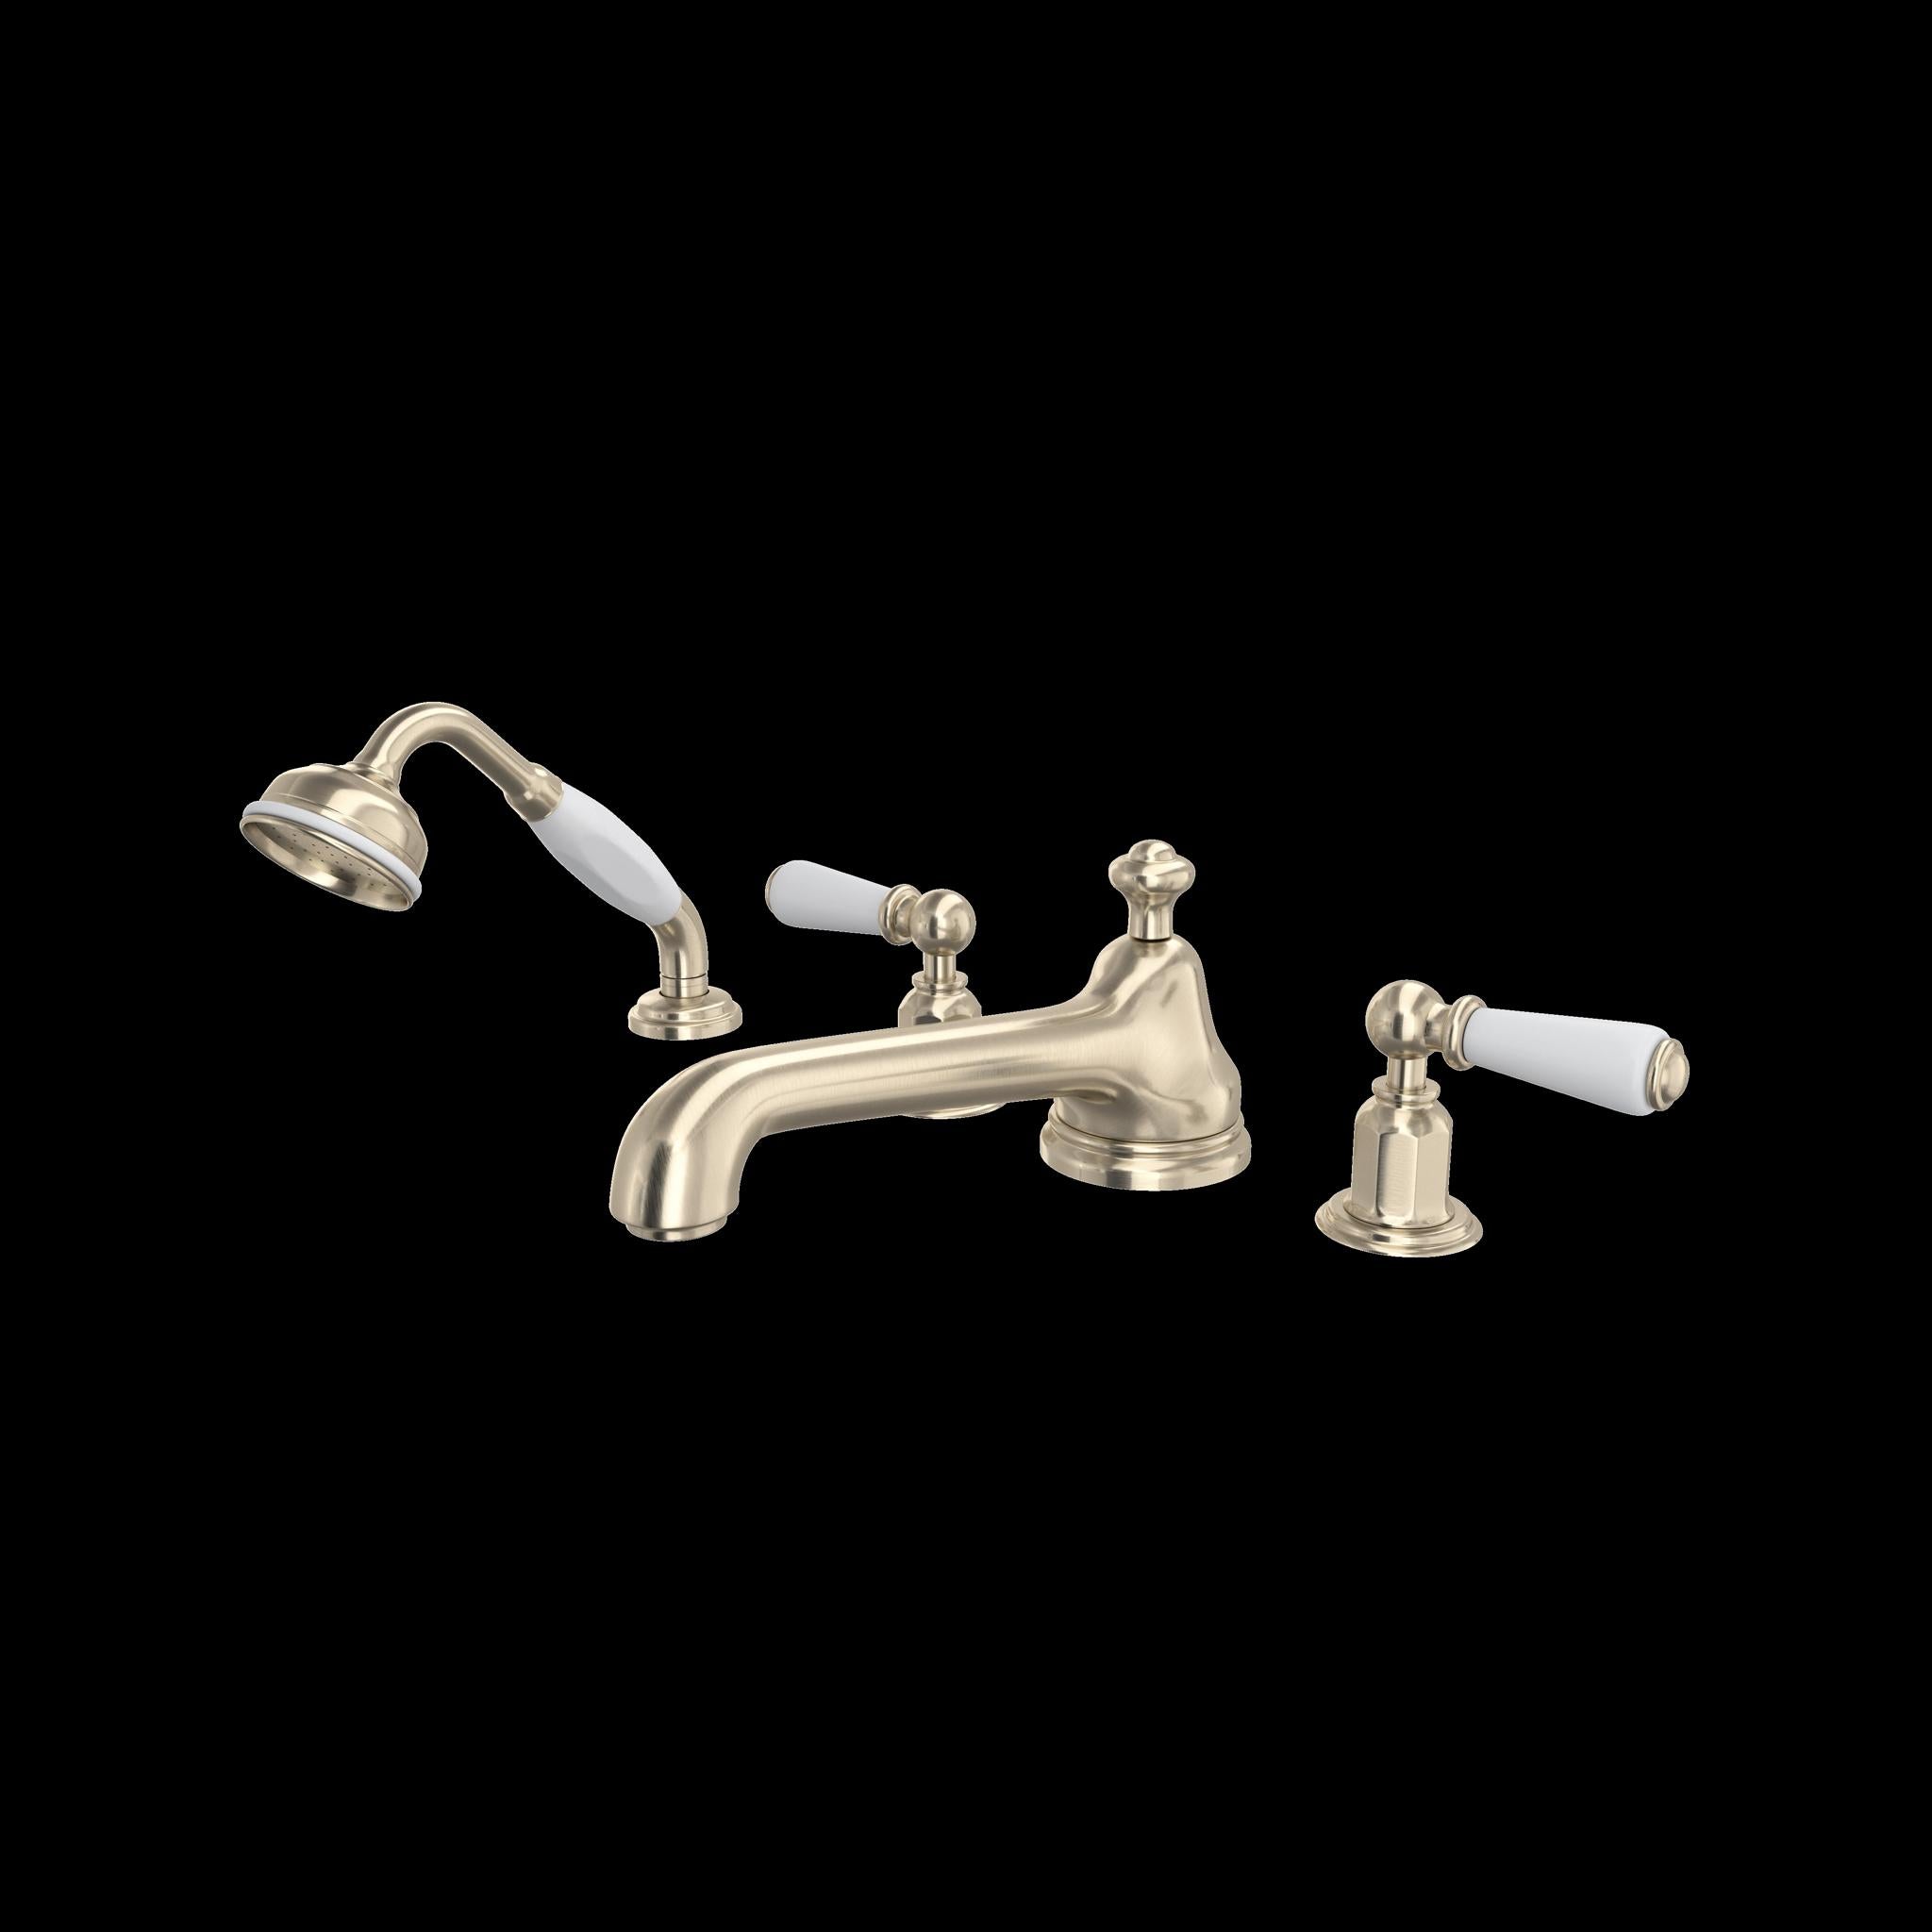 Perrin & Rowe U.3737 Edwardian 4-Hole Deck Mount Tub Filler with Low Spout